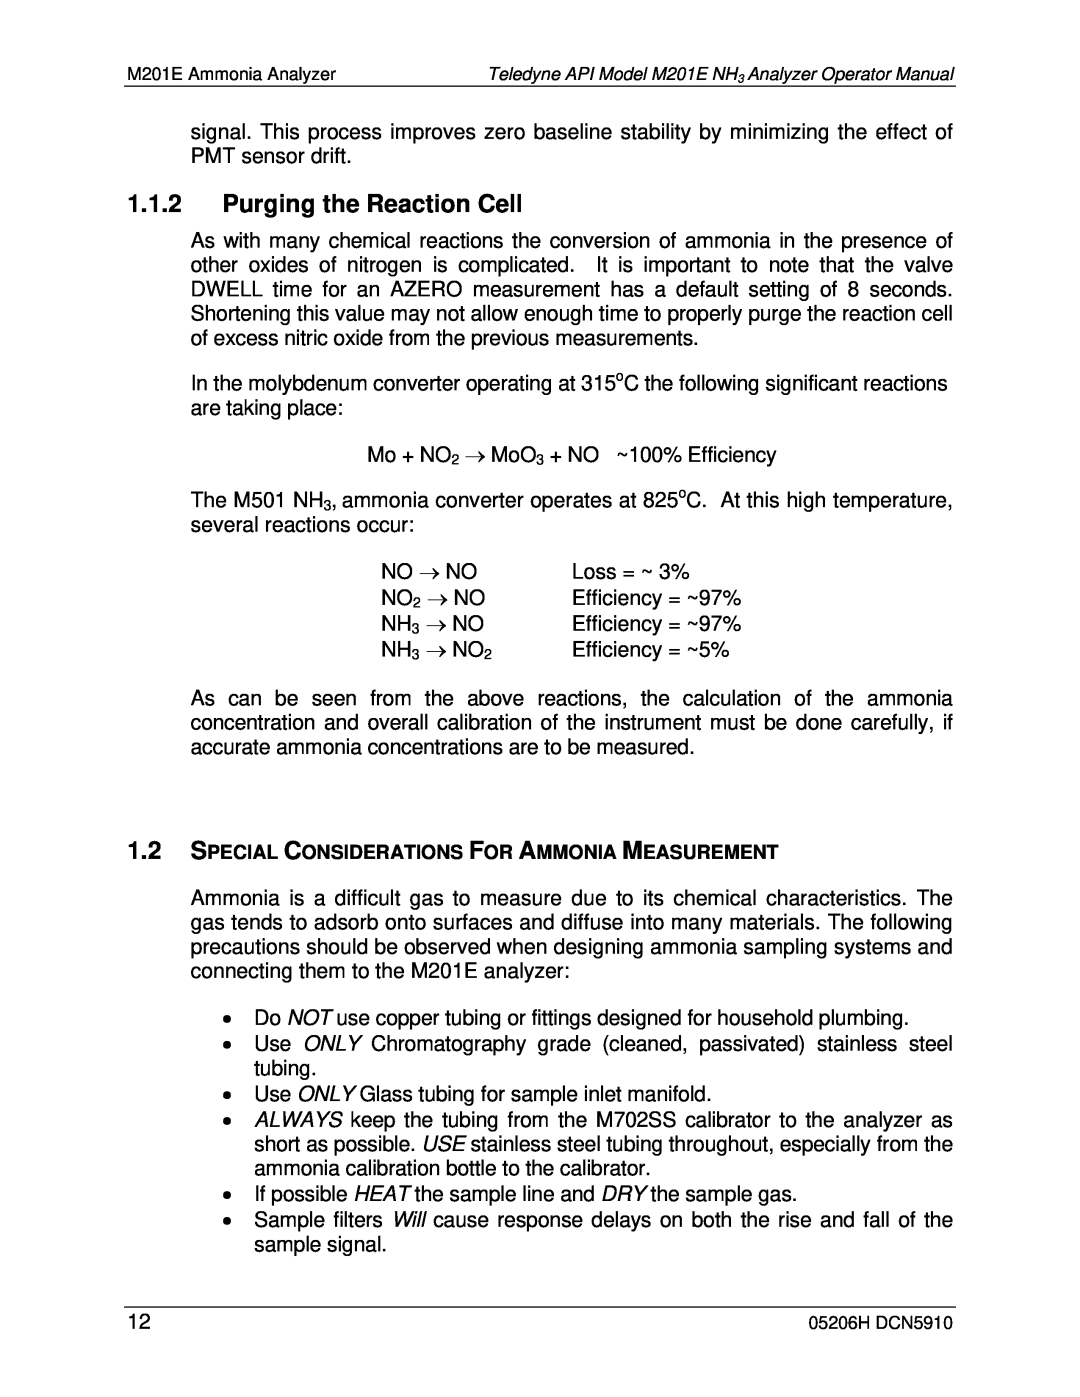 Teledyne M201E manual 1.1.2Purging the Reaction Cell, → No, → NO2 